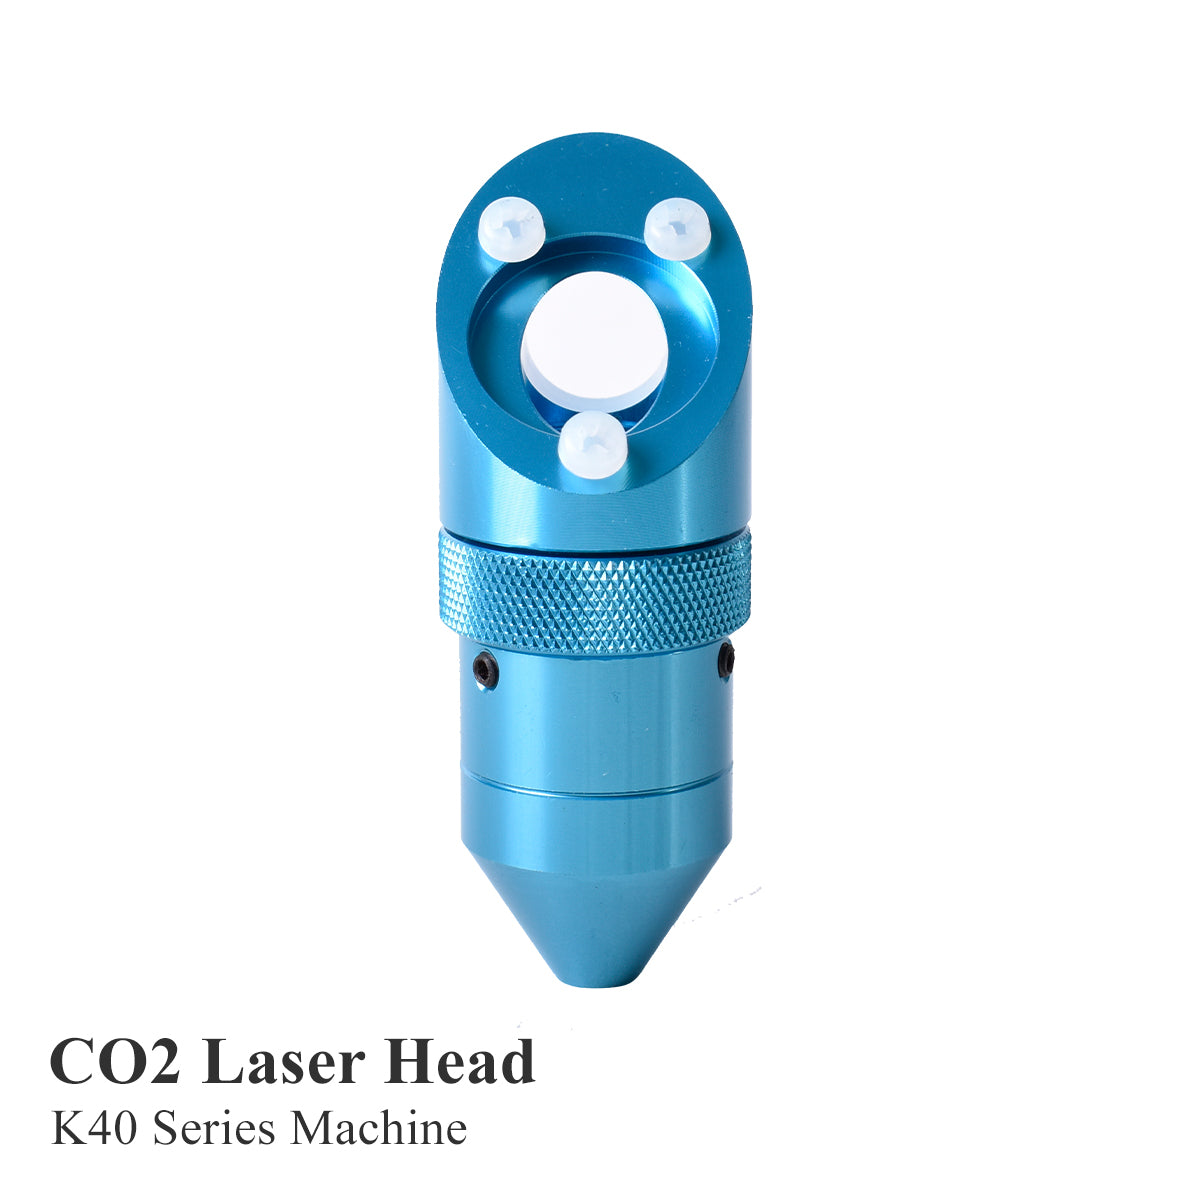 CO2 Laser Head With Air-assist Connect for K40 Series Laser Engraving Machine Lens Dia 12mm Focusing Length 50.8mm Mirror 20mm